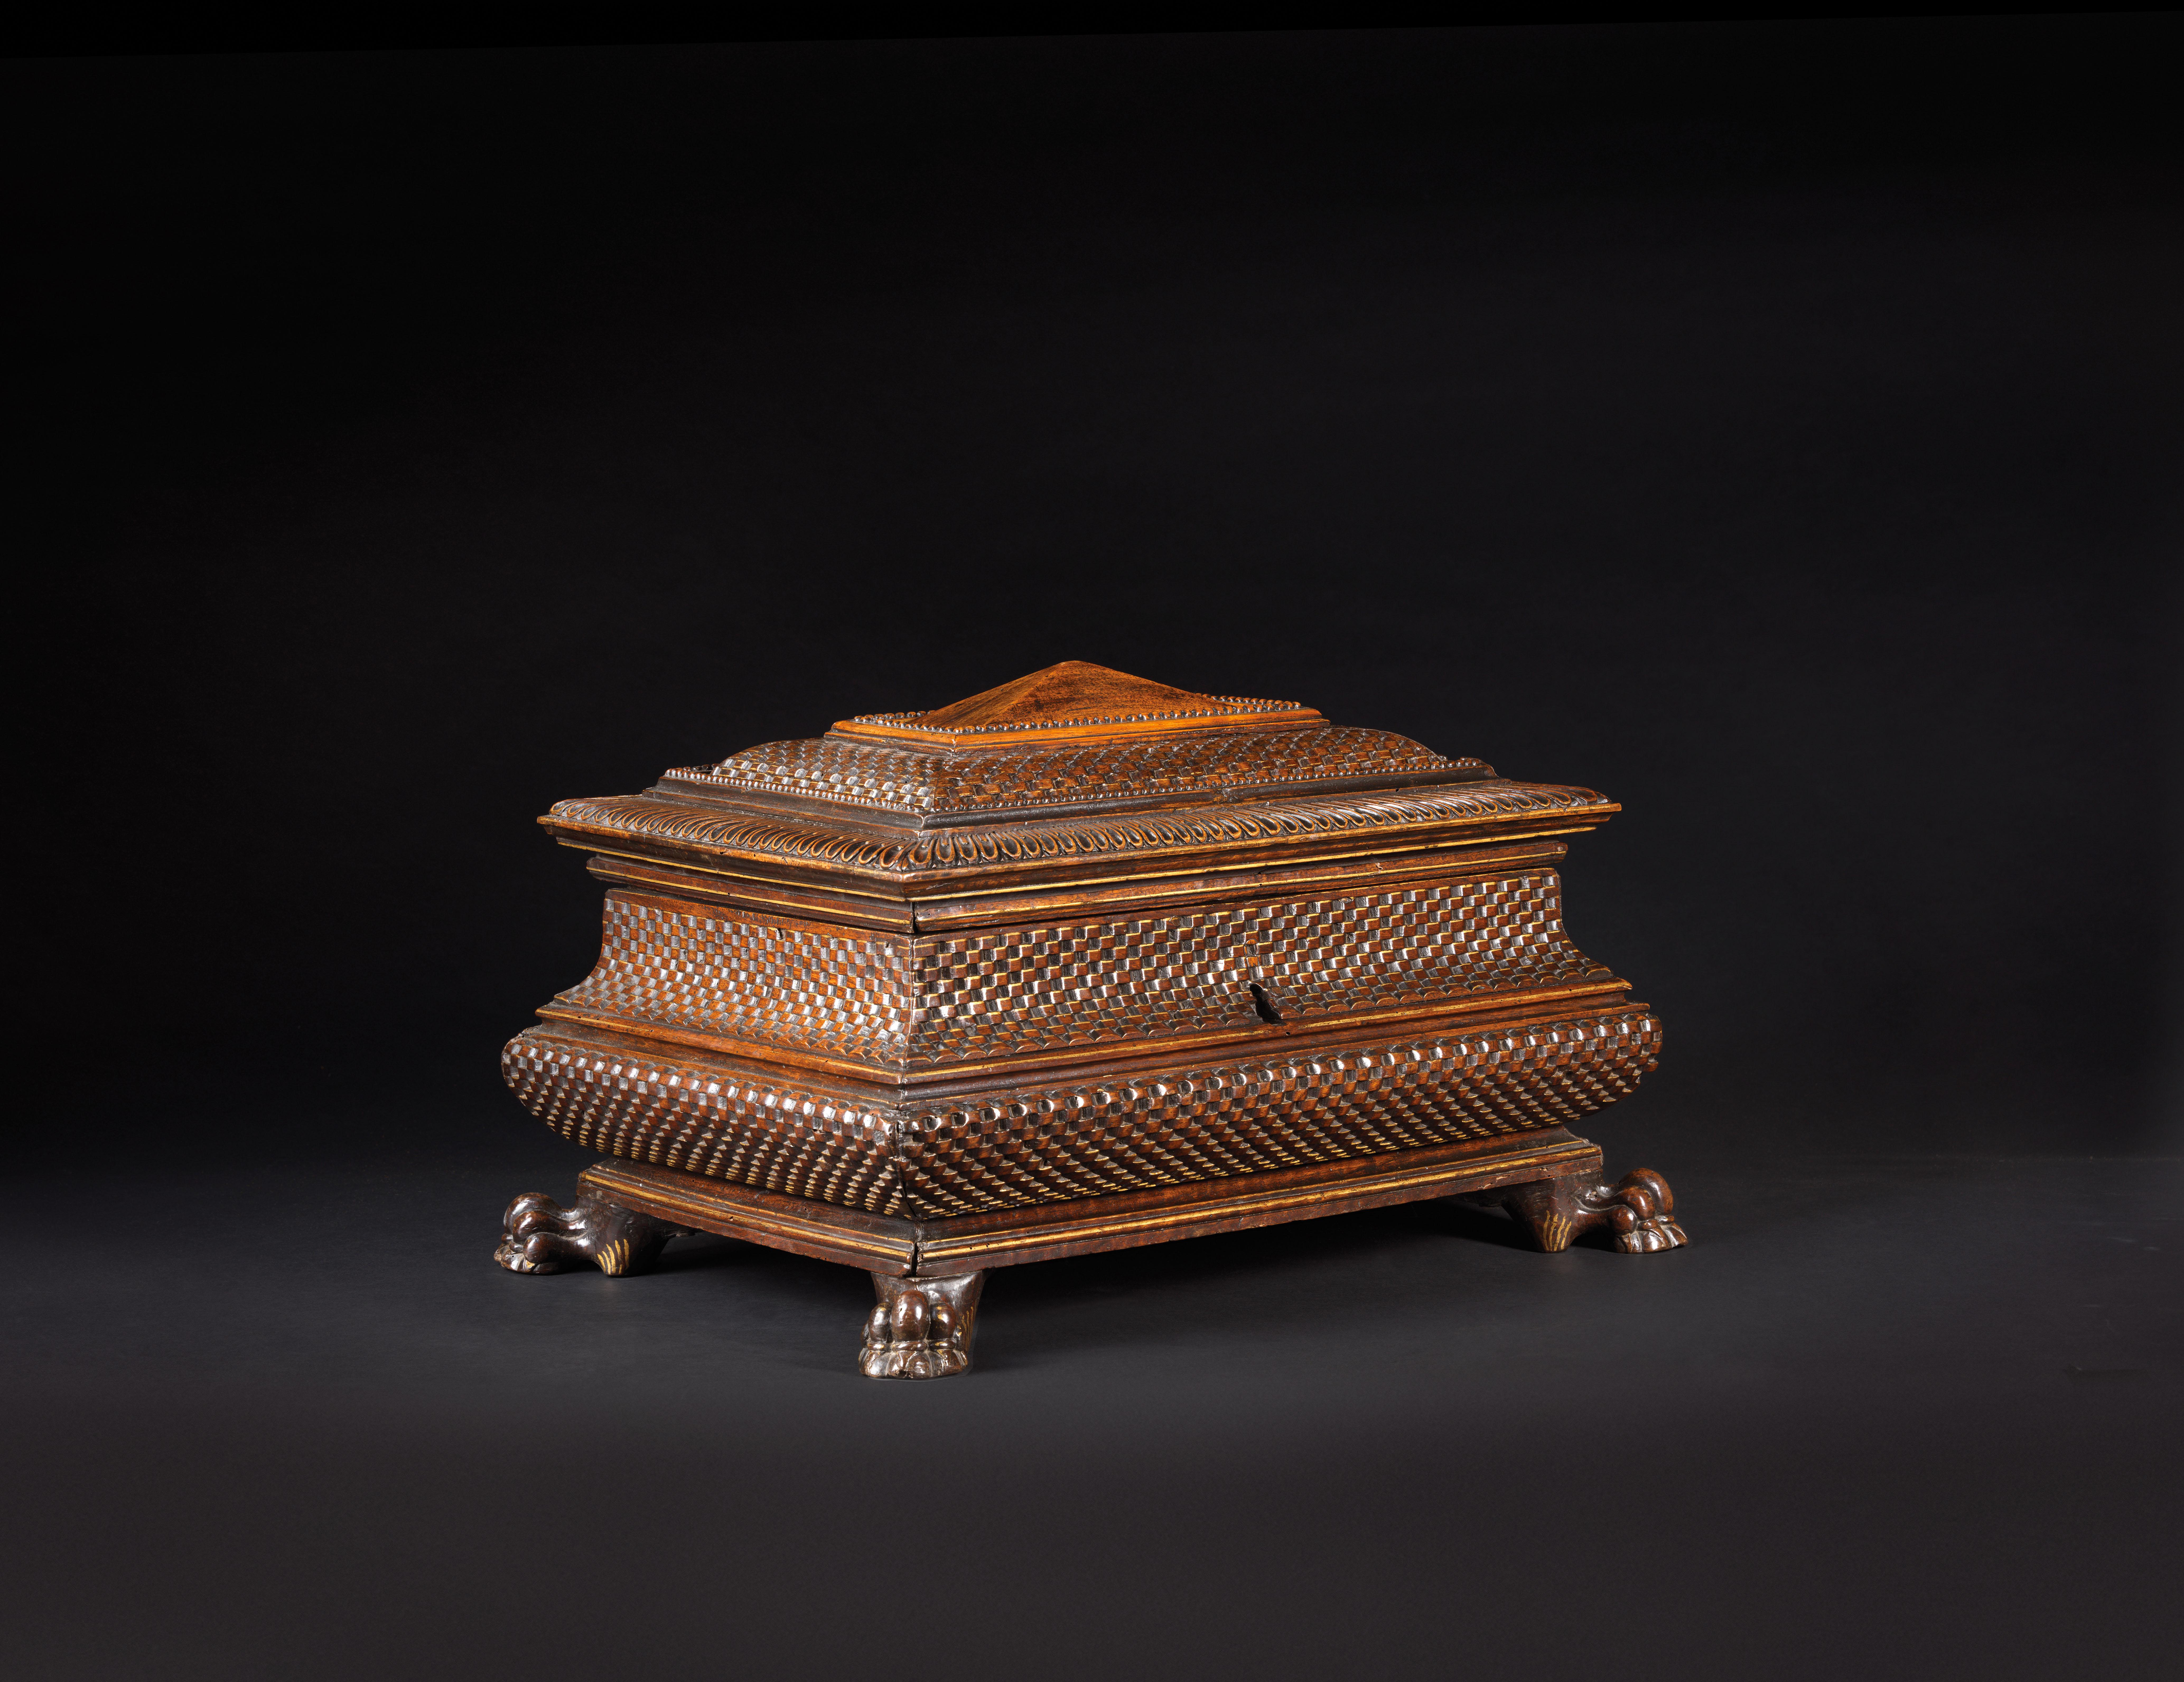 Provenance : Jean Gismondi collection, before 1973.

This important walnut jewelry chest is outlined with a gilt motif and presents a decor imitating basketry. The lid is topped by a rectangular pyramid framed with pearl friezes and reeded canals.